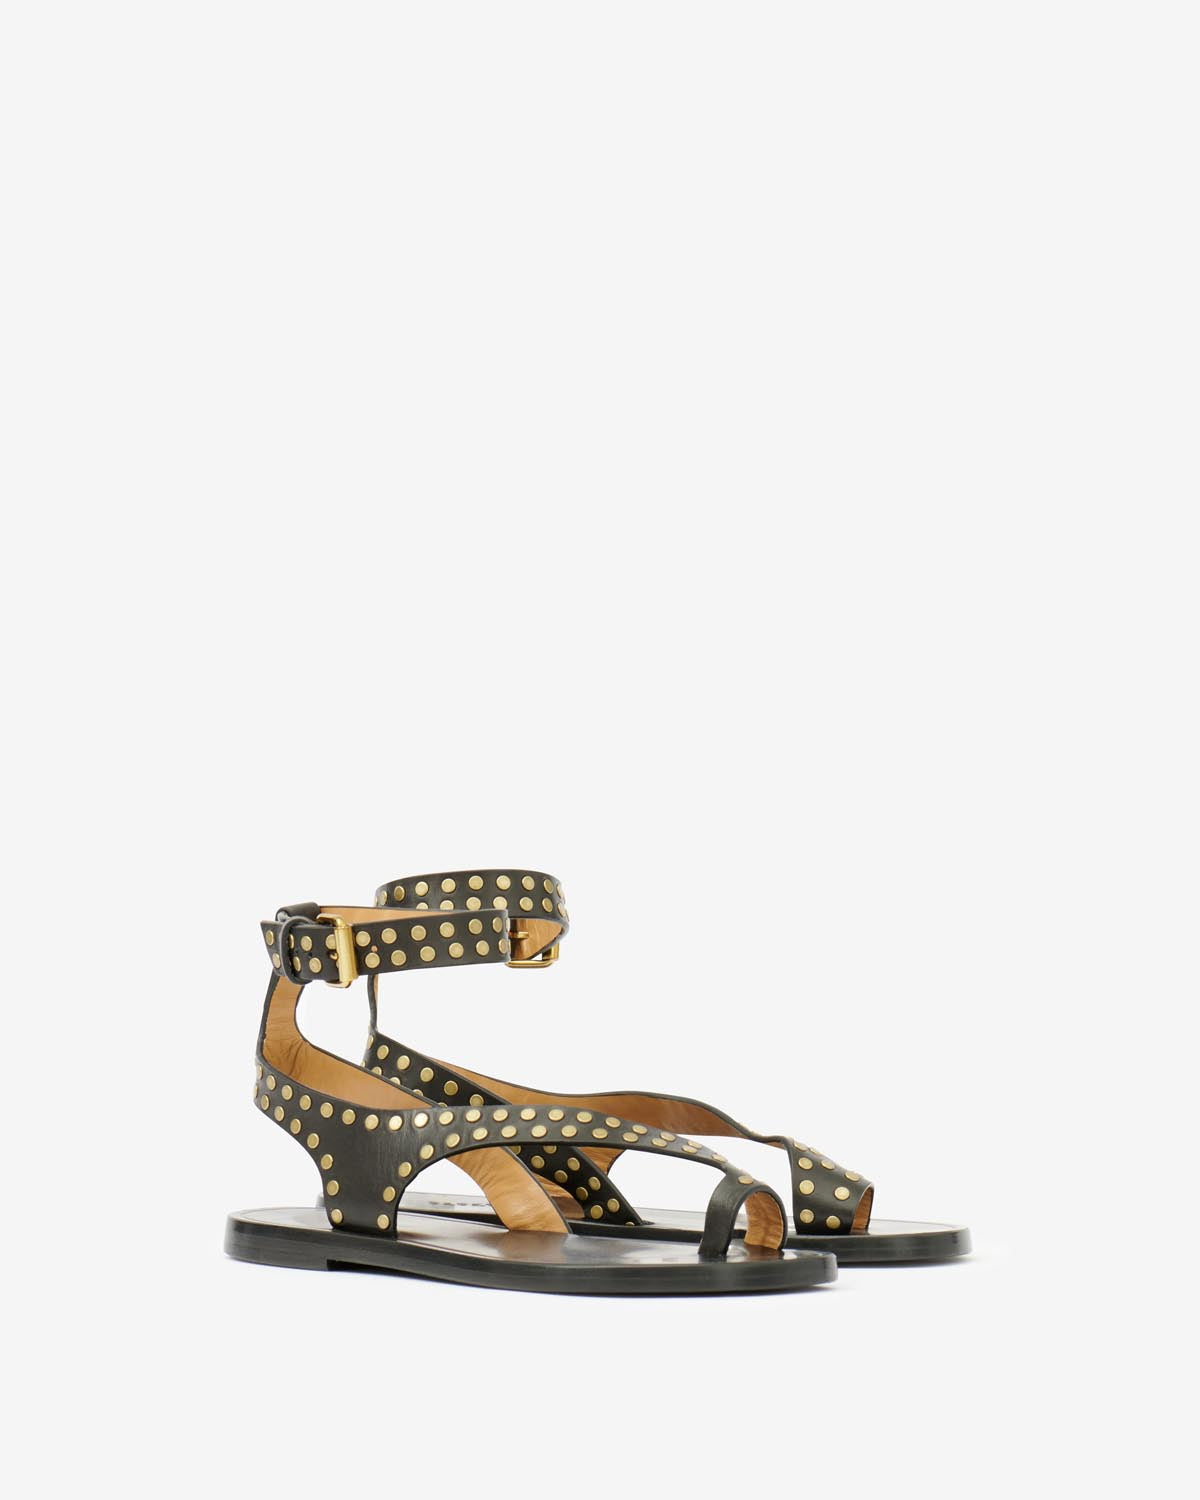 Jiona sandals Woman Black and gold 2